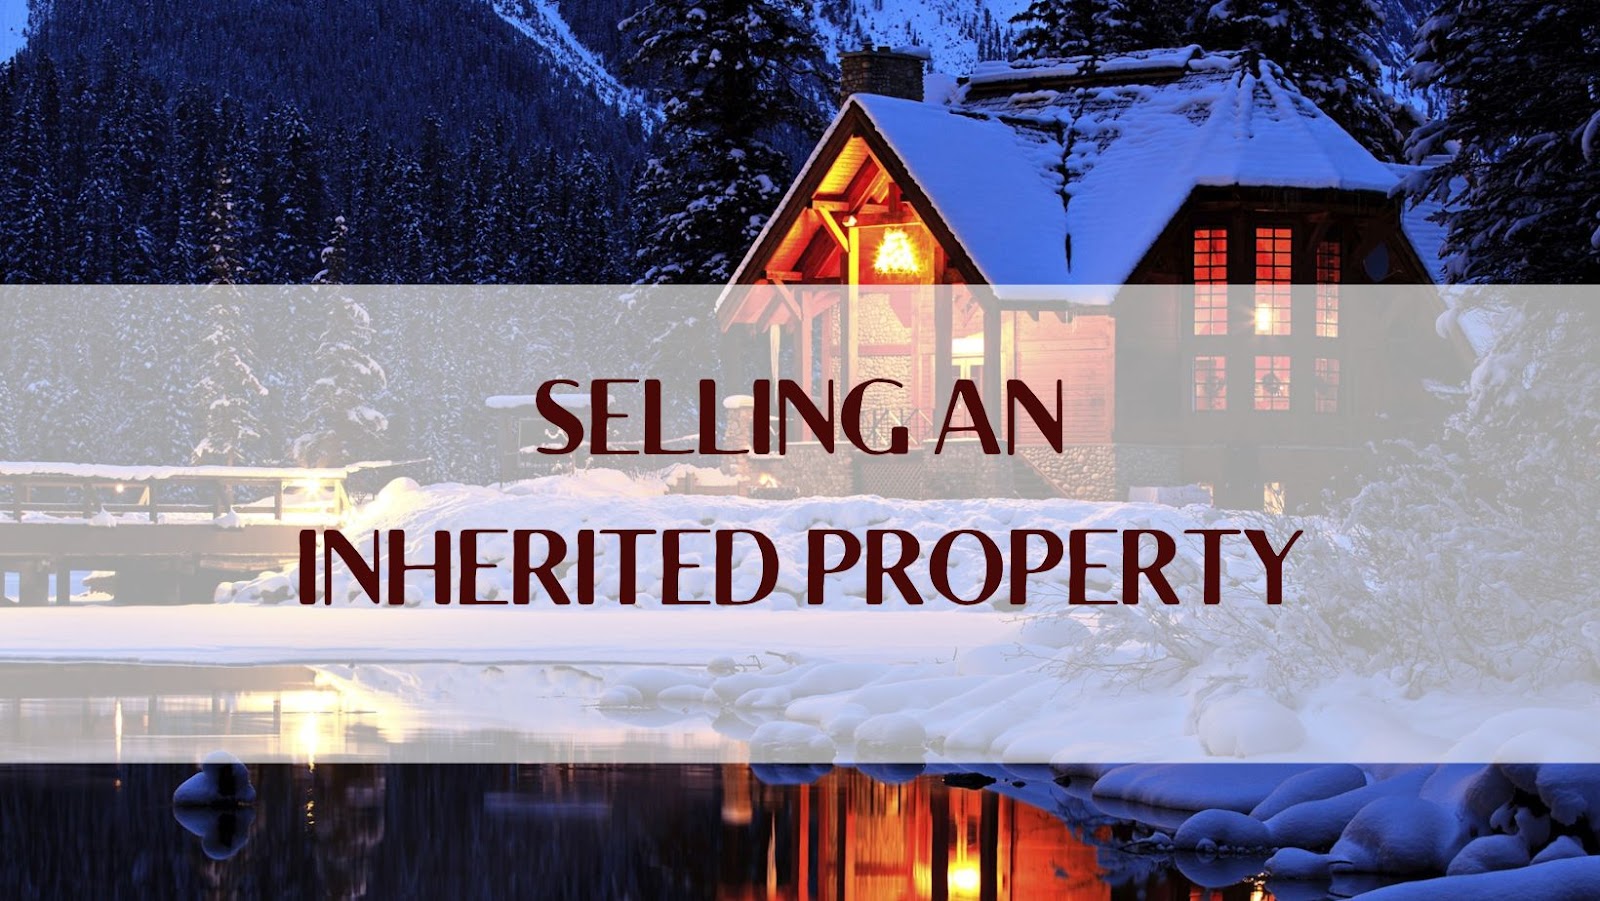 If you own a property that’s stuck in probate that you are ready to sell, call us at 410-864-6272 day or night to get a competitive cash offer for that inherited home. We buy properties in any condition and no matter what the estate’s financial situation might be